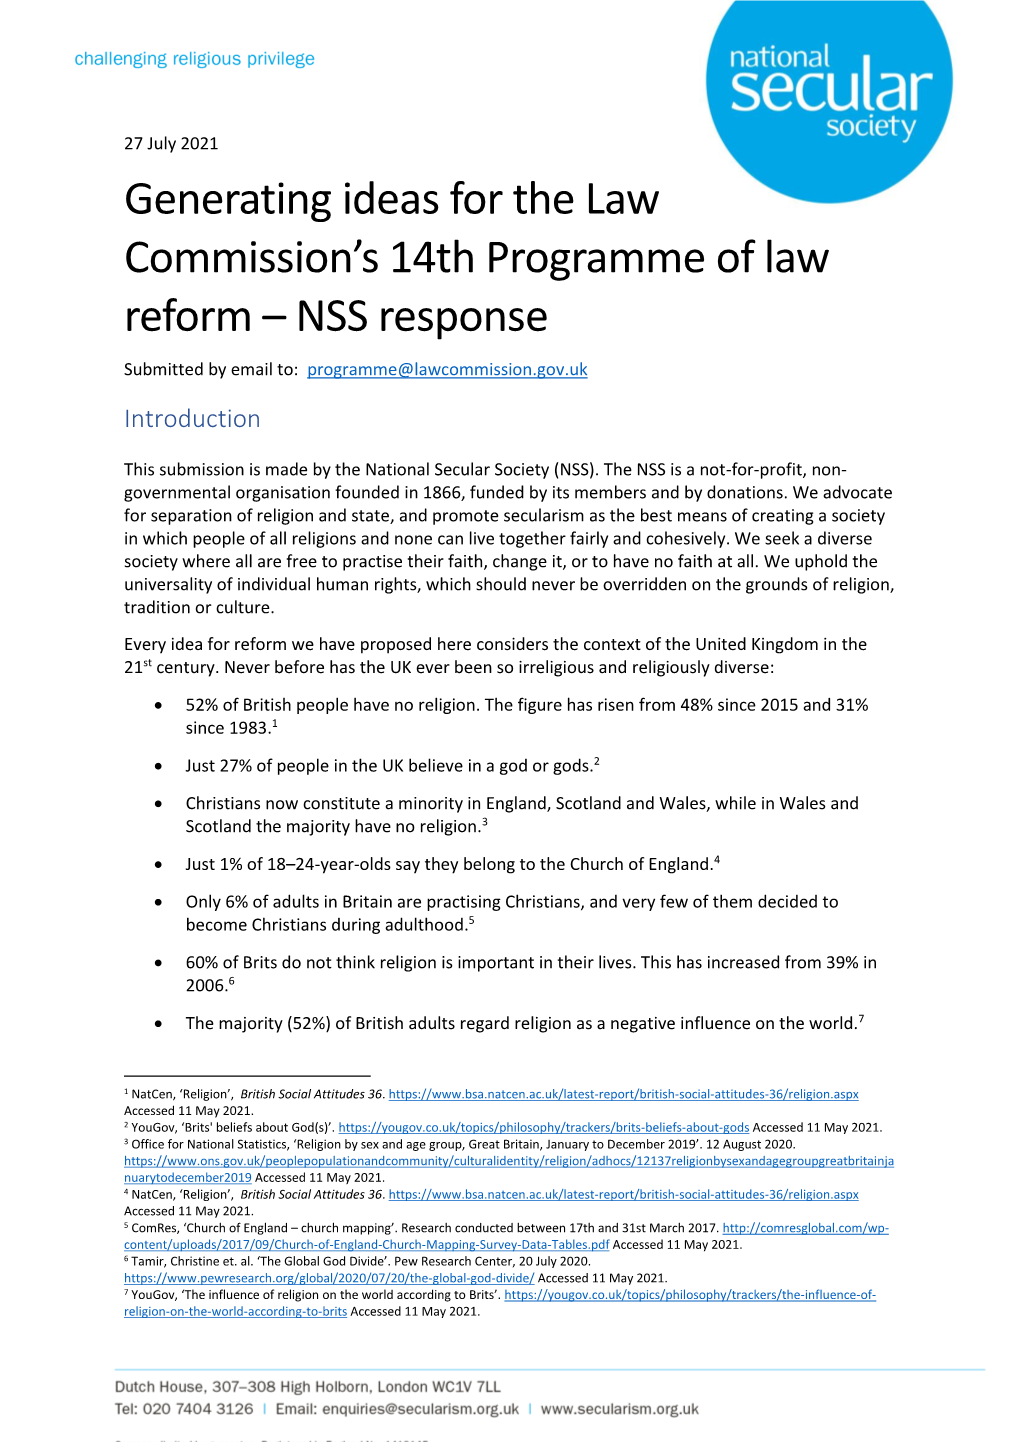 Generating Ideas for the Law Commission's 14Th Programme of Law Reform – NSS Response